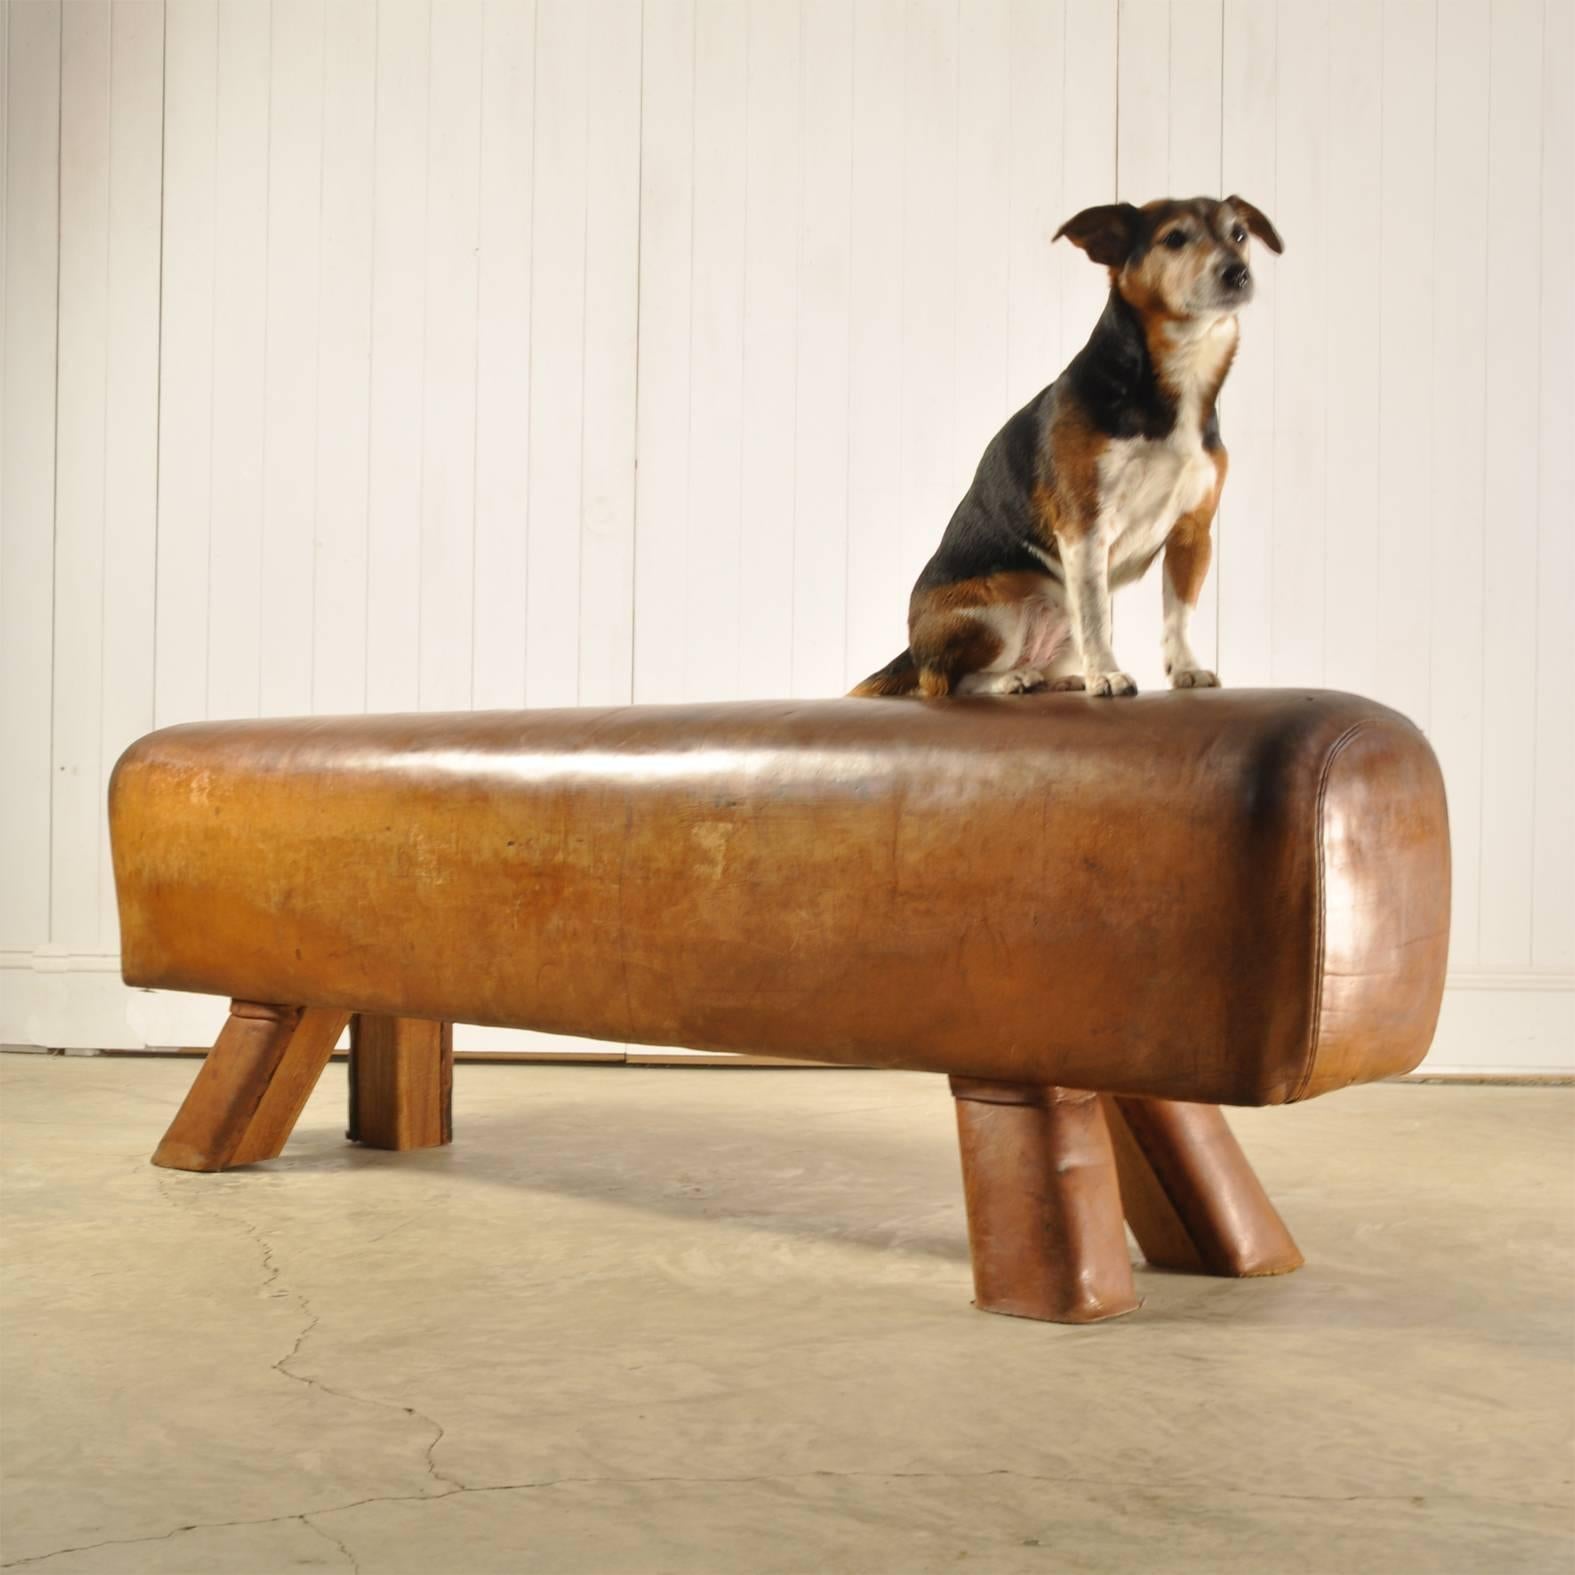 We are big fans of these early 20th century pommel horses, sourced in the Czech Republic.

We have cut the legs down so that they are a suitable height to sit on. Fantastic character and patina to both the leather and the legs. This one has a